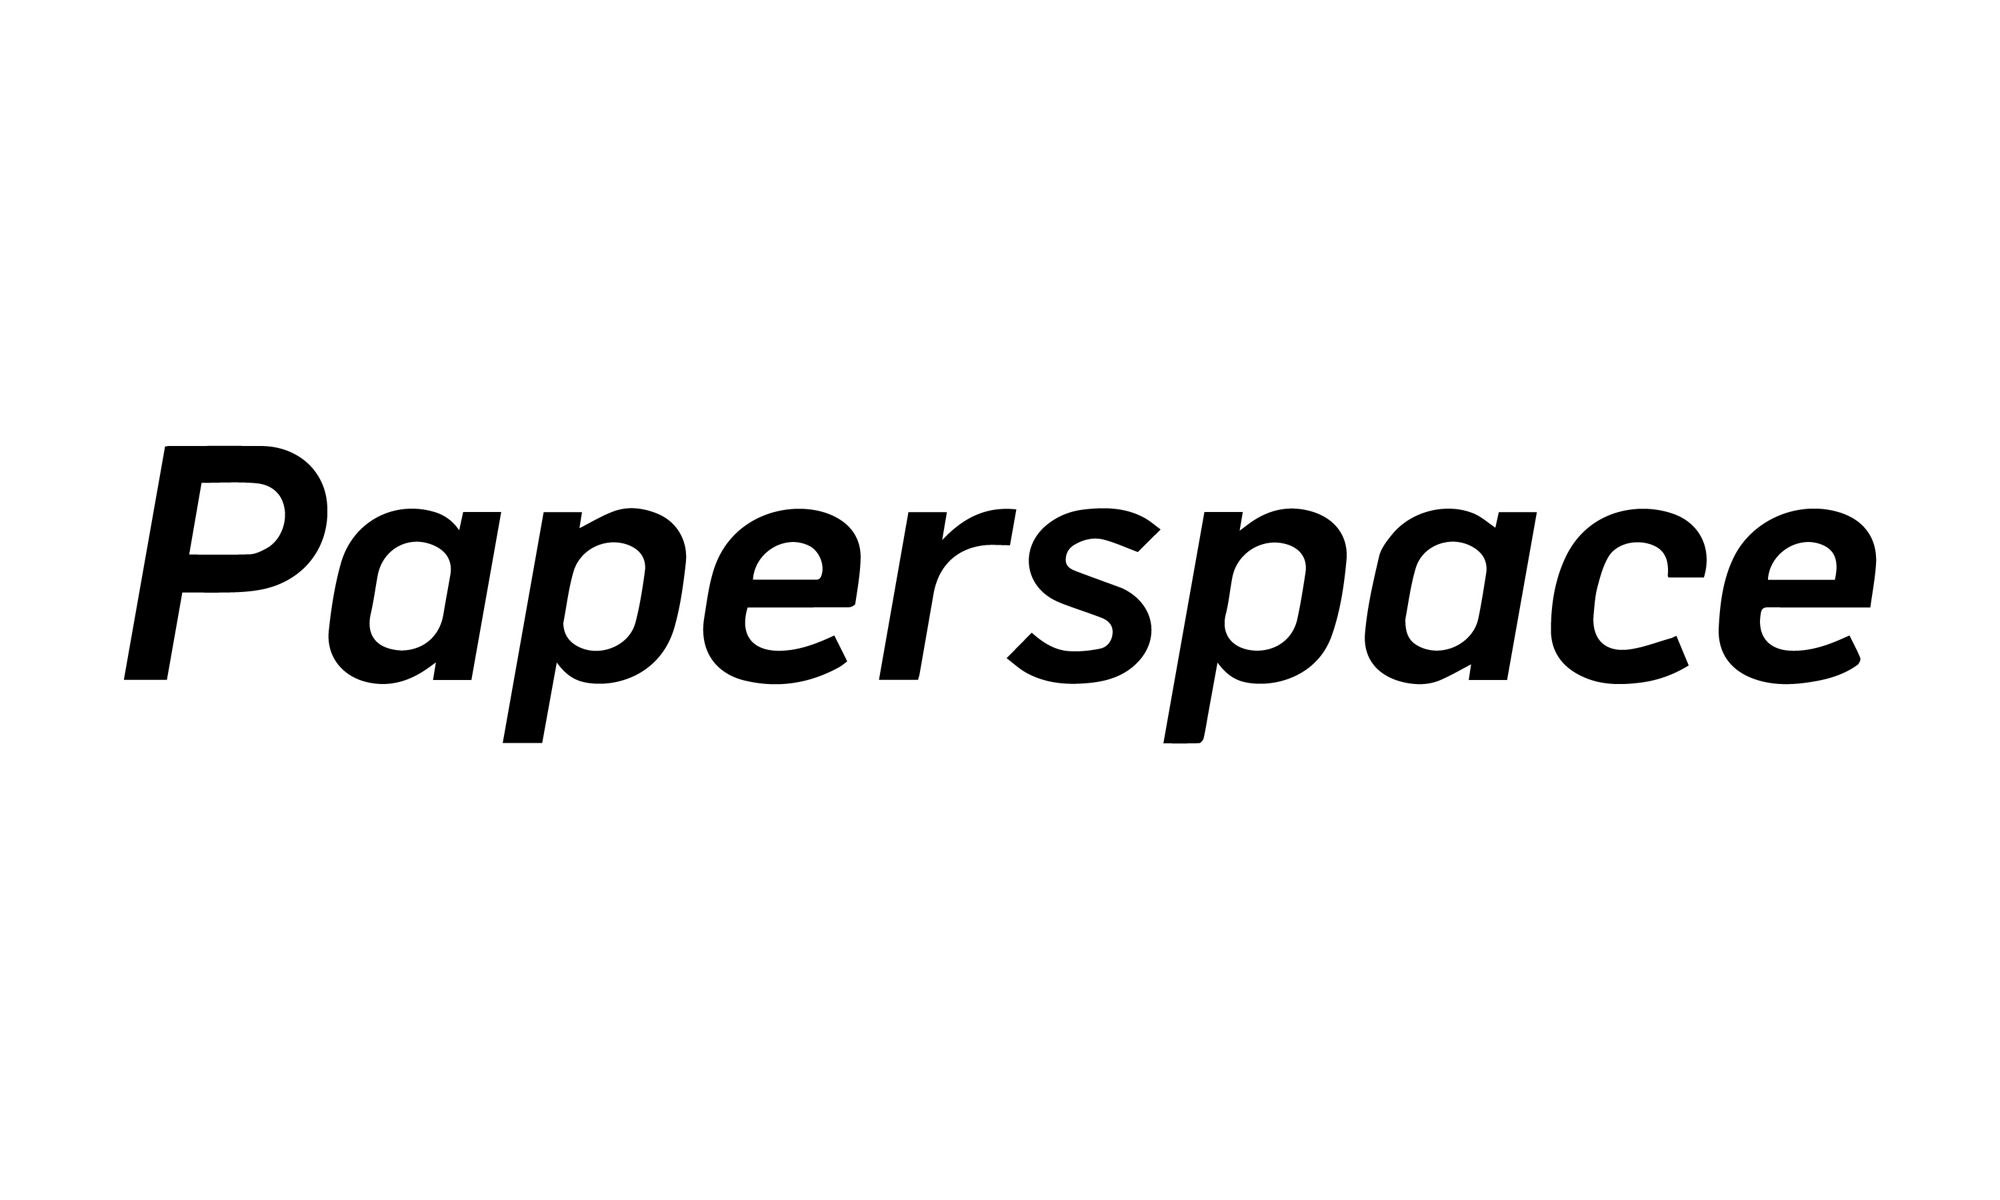 Paperspaceの会社ロゴ